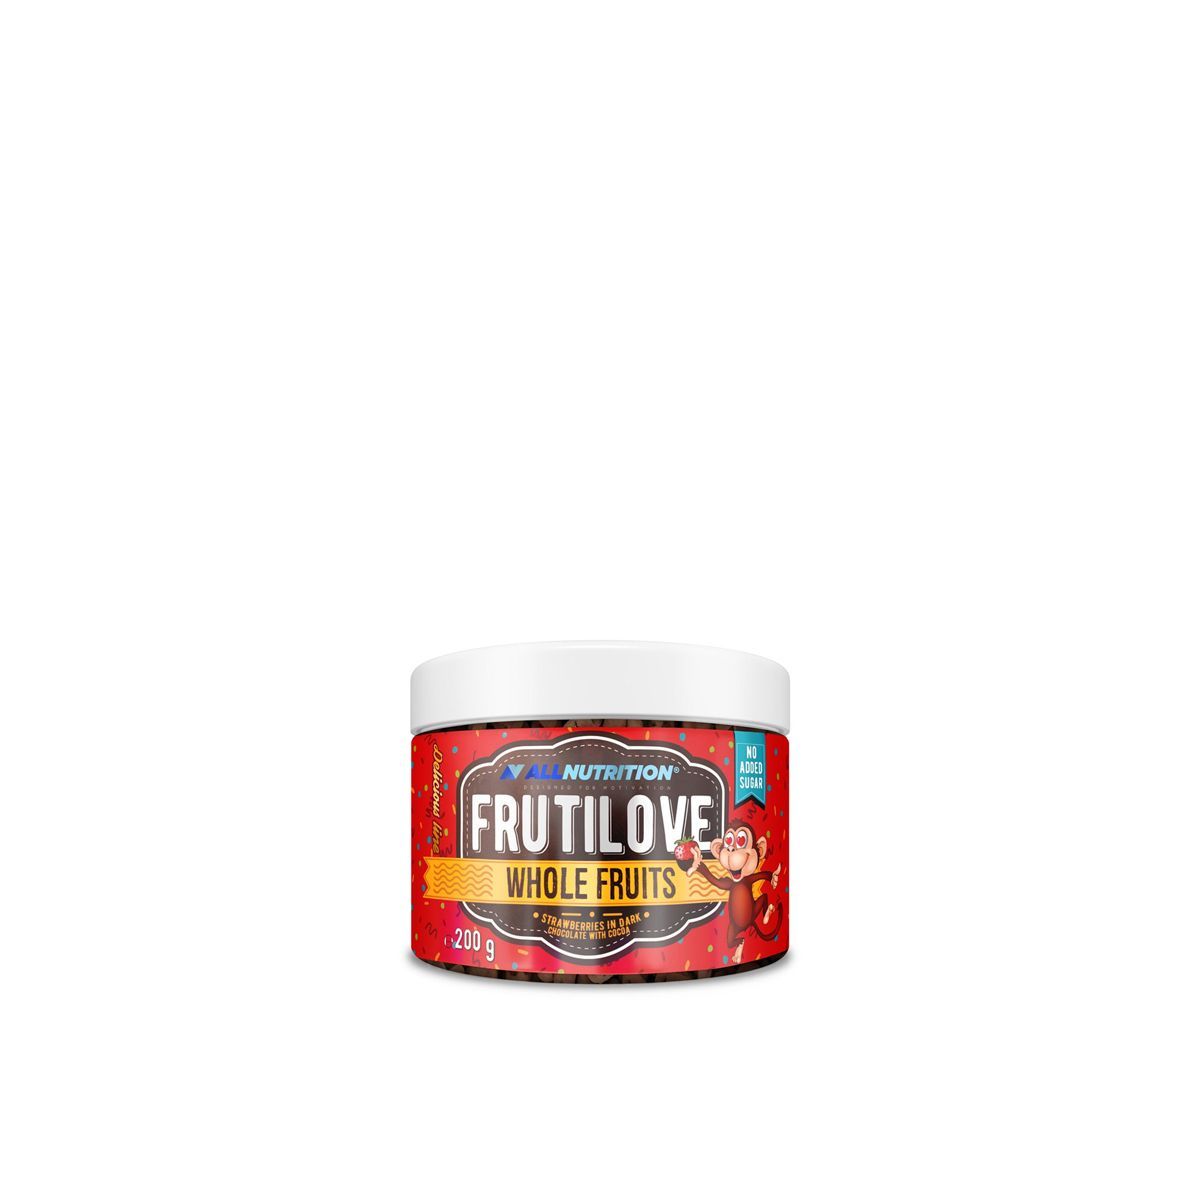 ALLNUTRITION - FRUTILOVE WHOLE FRUITS - STRAWBERRY IN DARK CHOCOLATE WITH STAWBERRY POWDER - 200 G